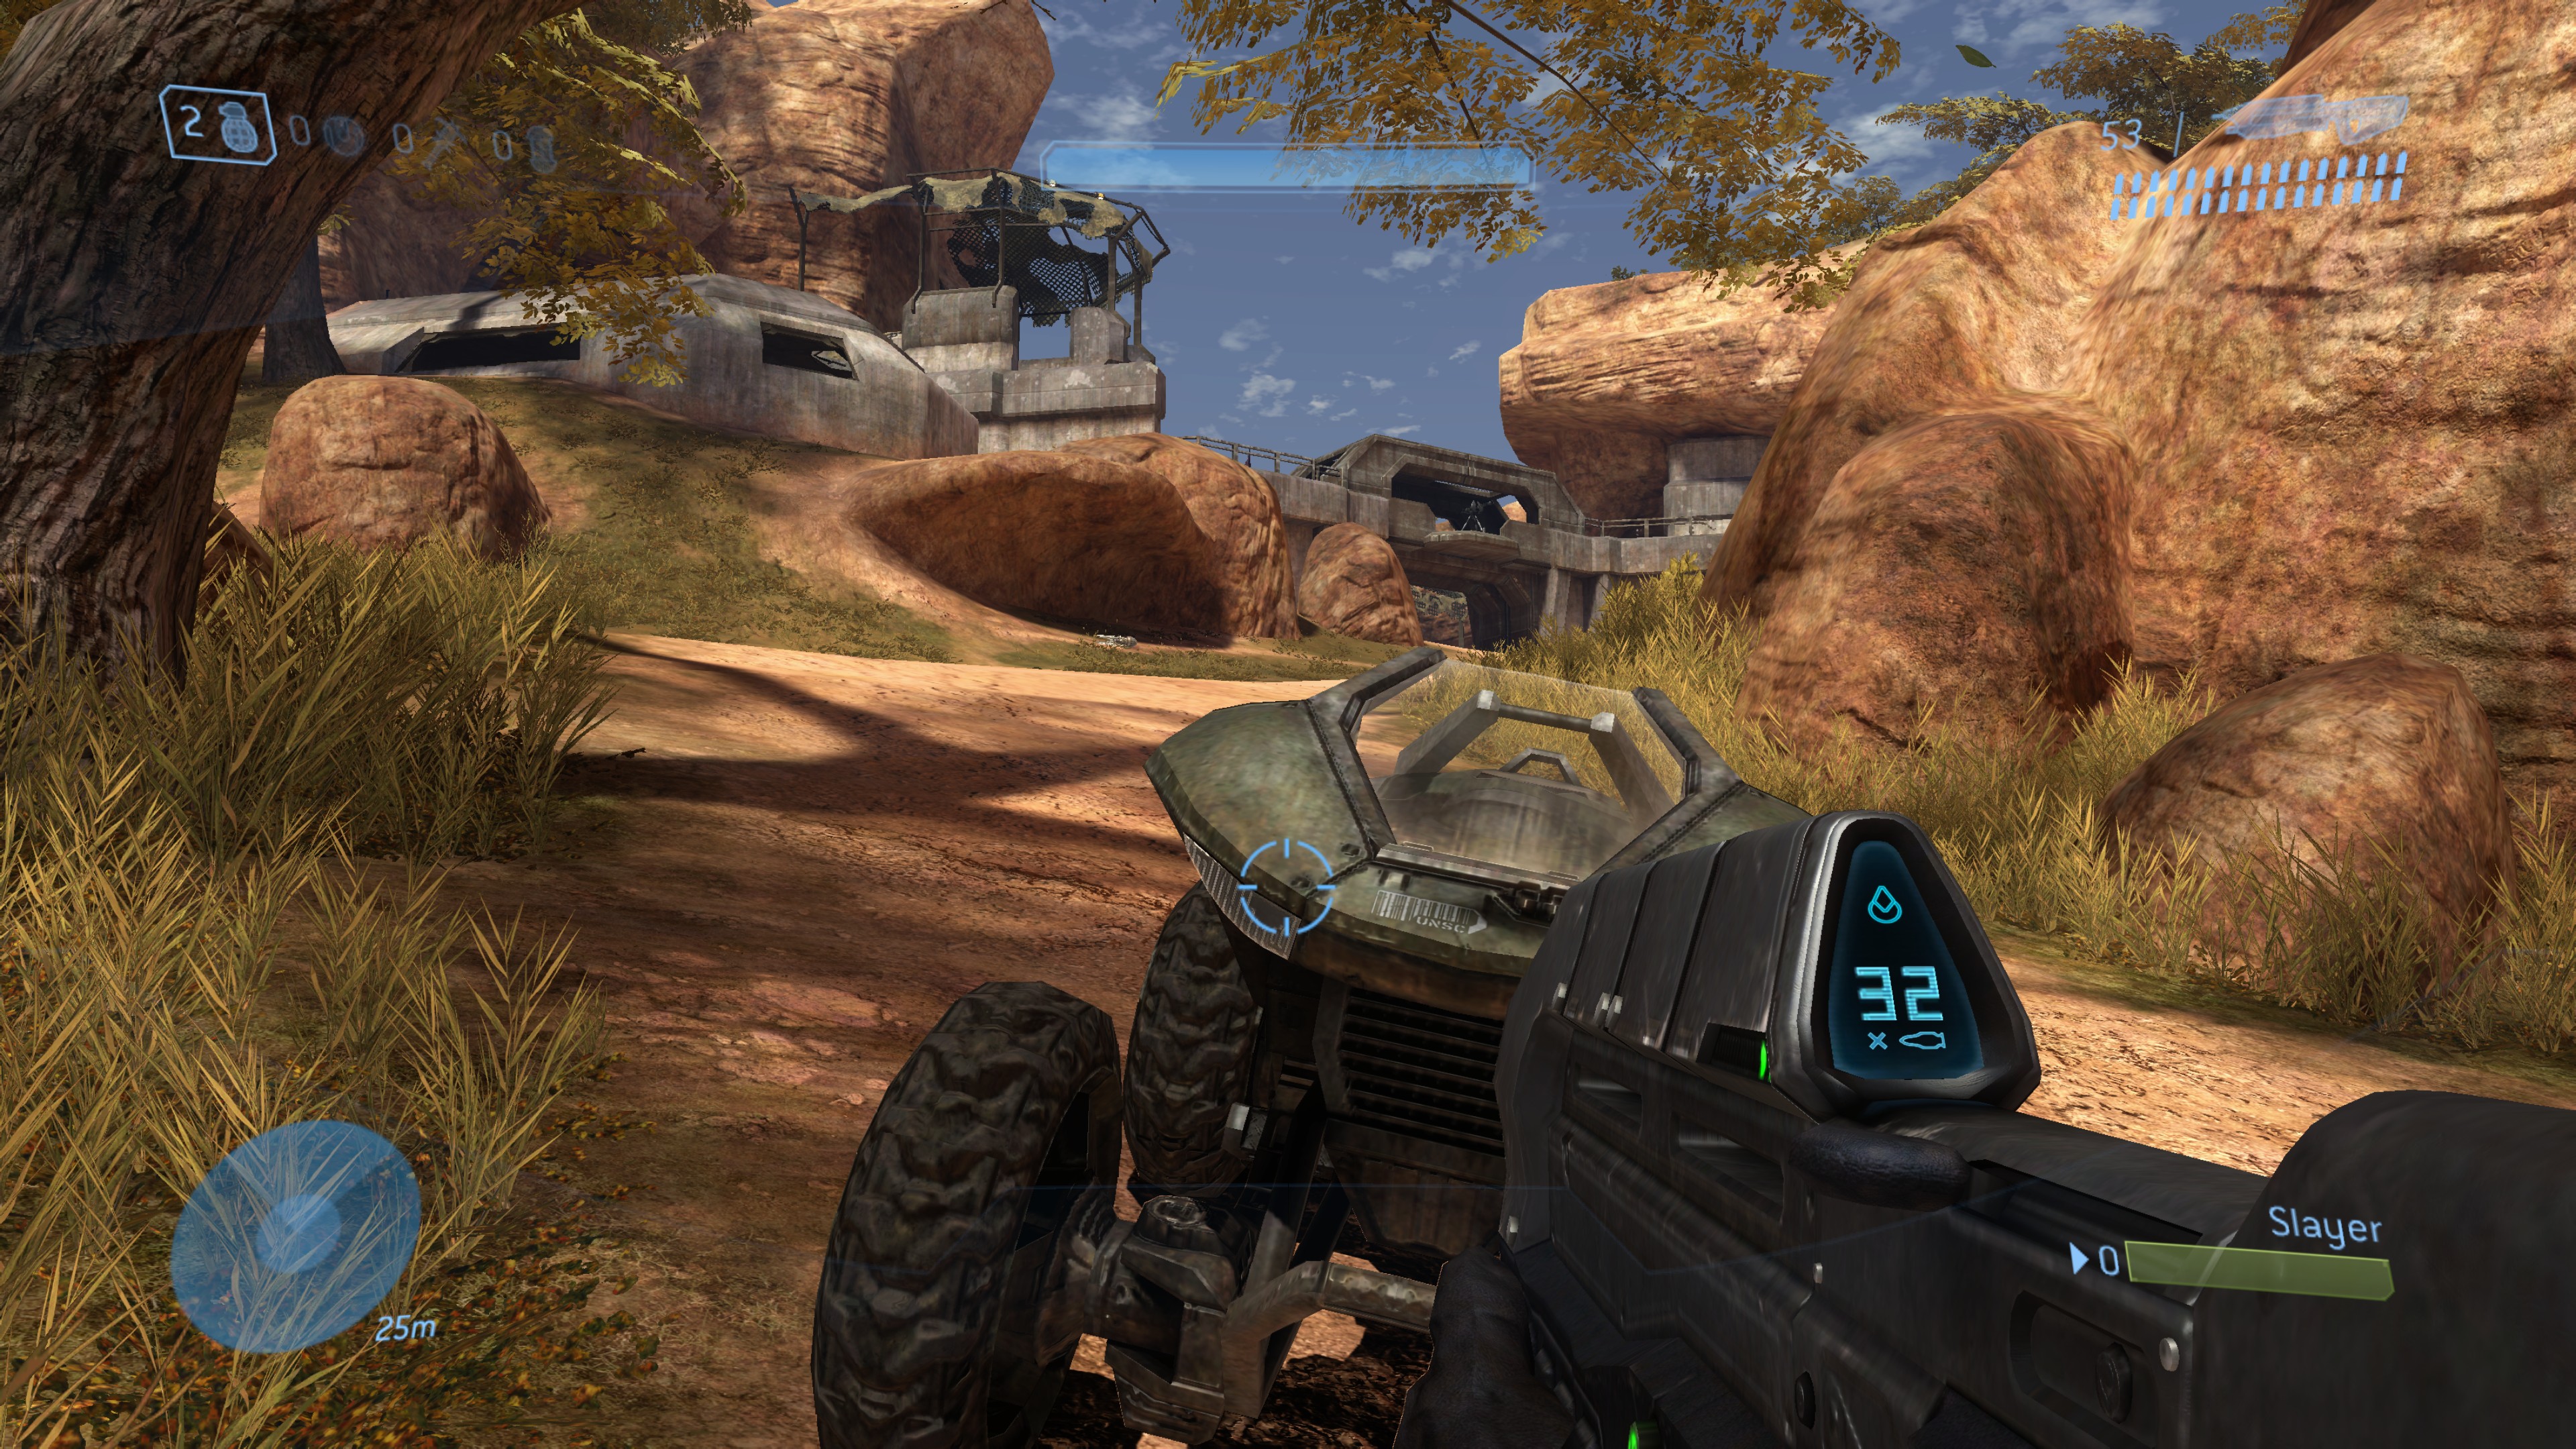 Halo 3 with 3x3 resolution scaling